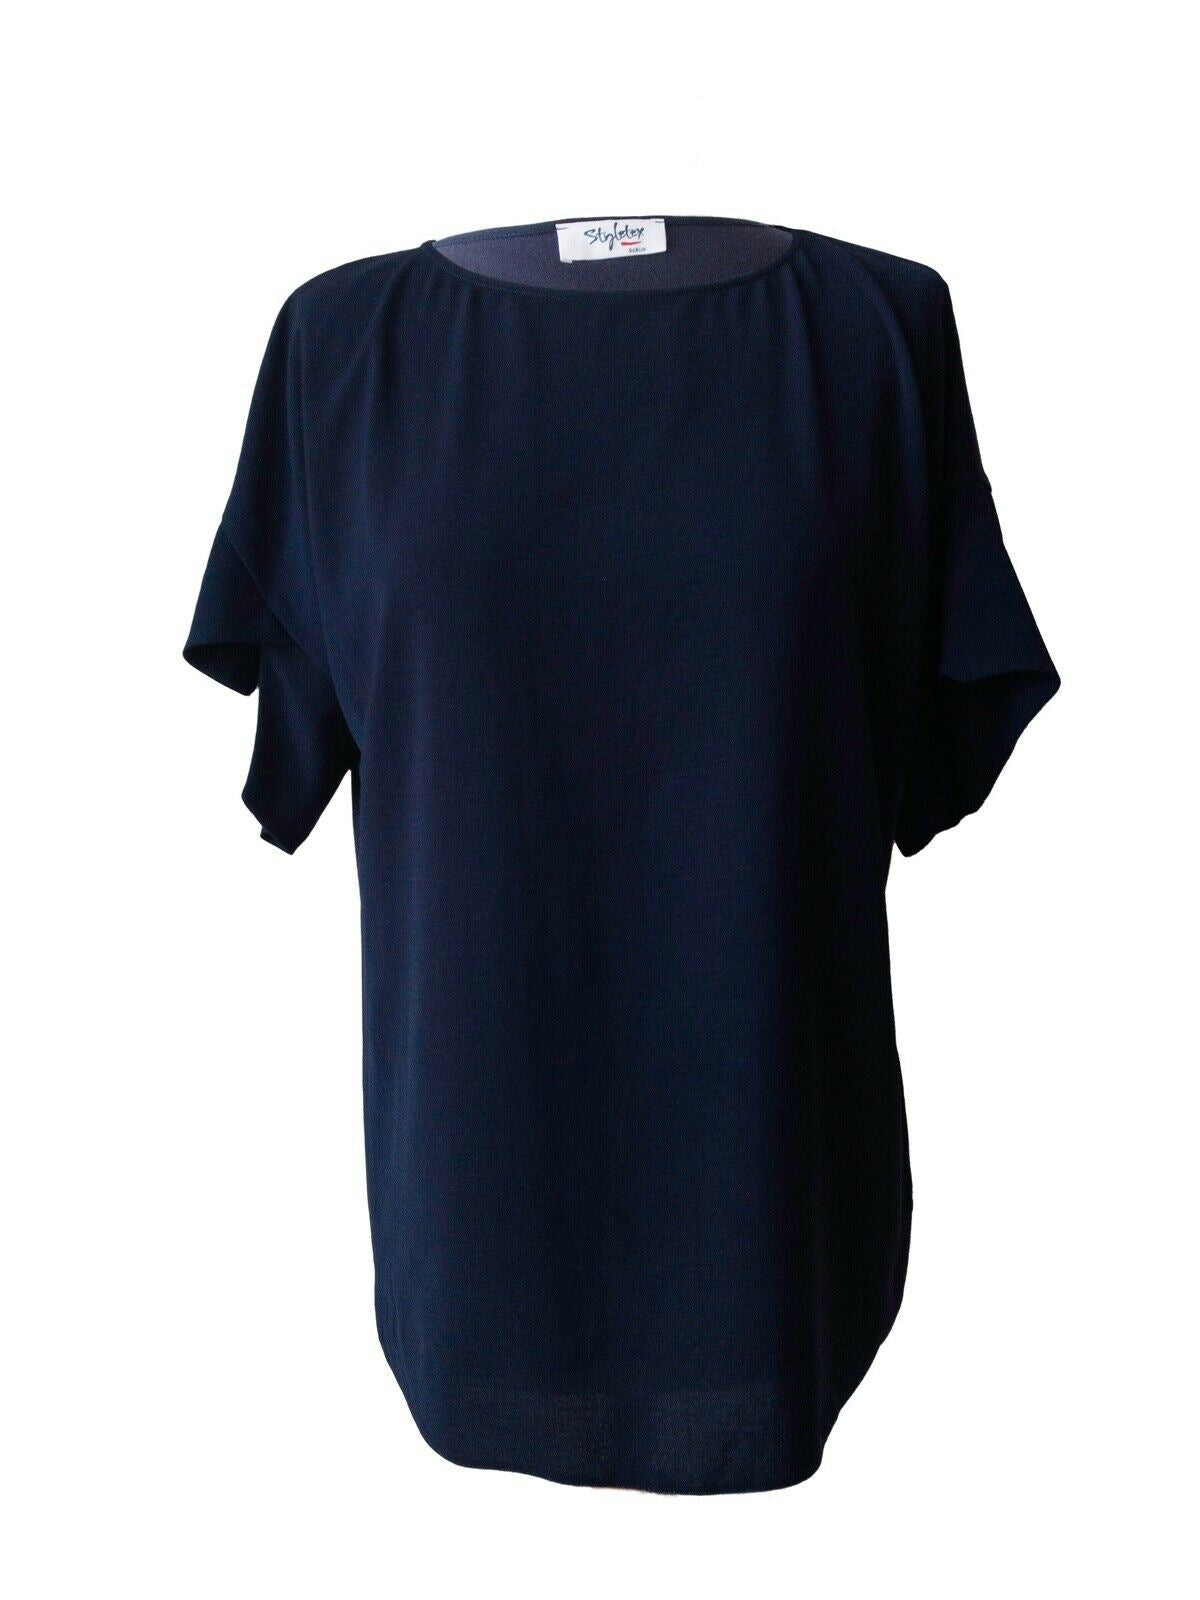 Dark Blue Contrast Material Top Tee Size M